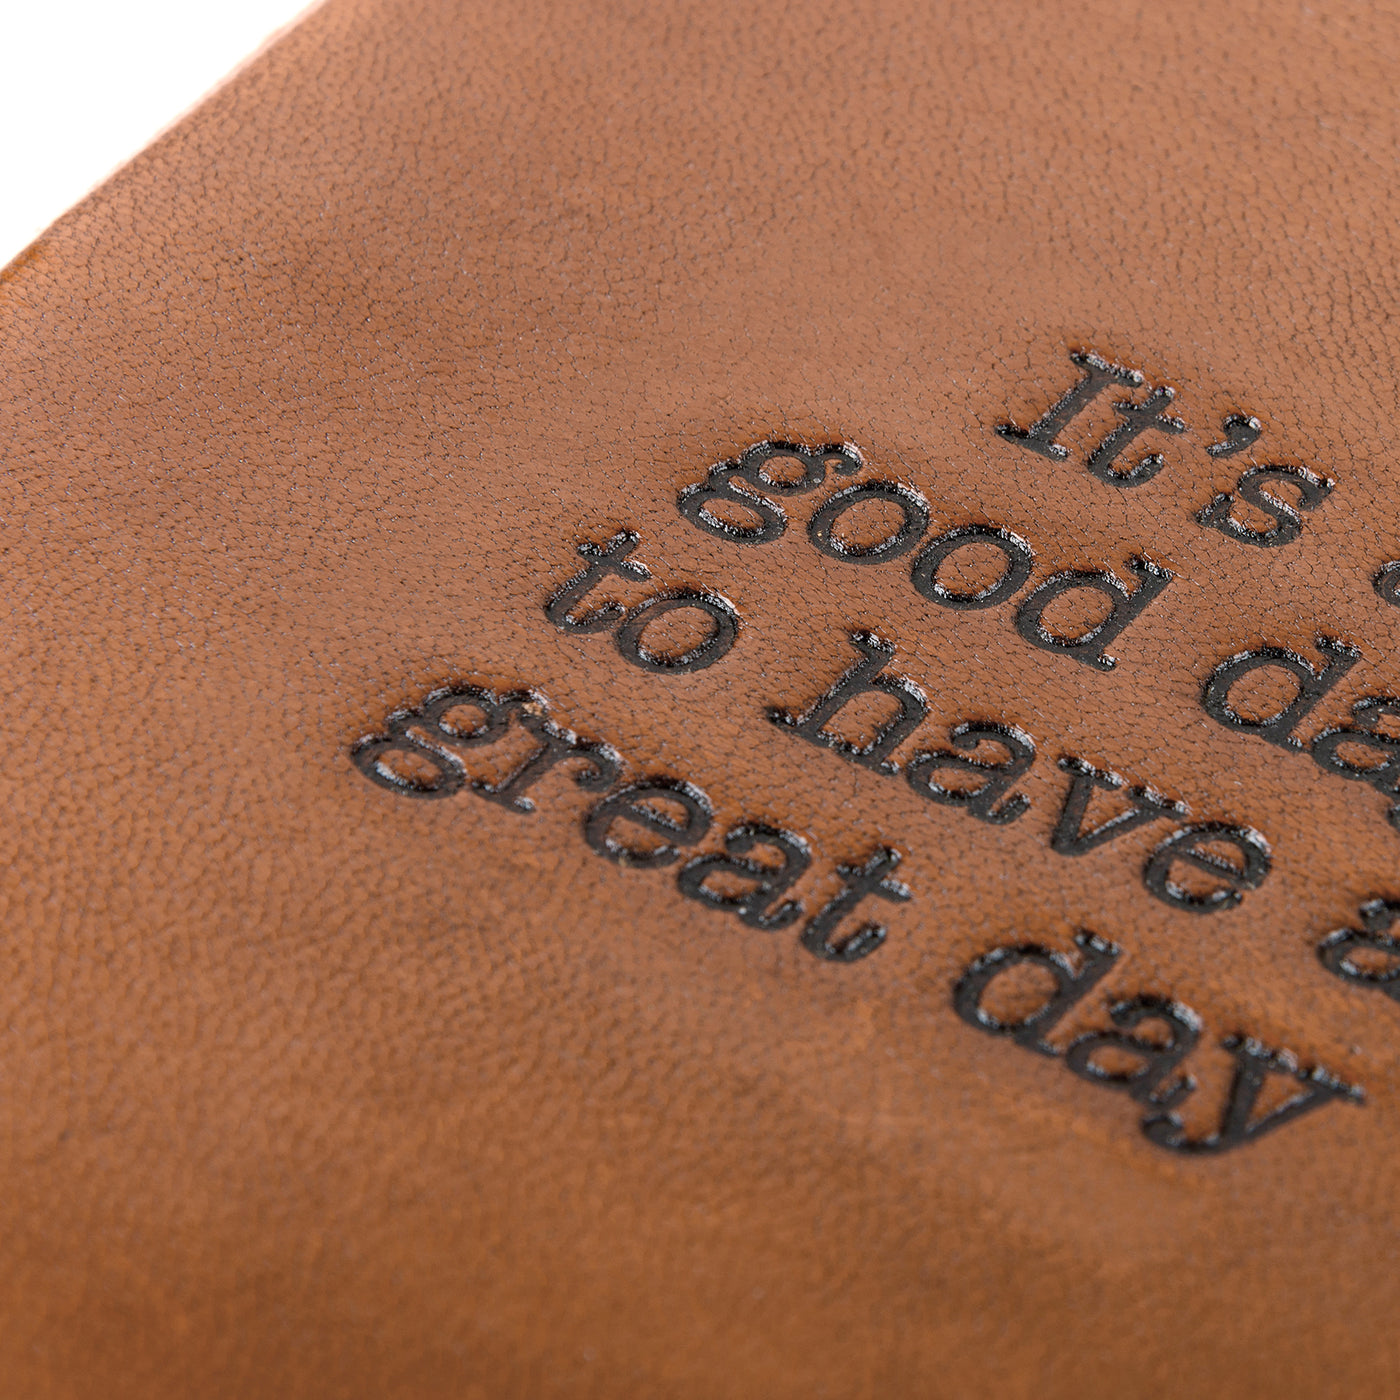 It's A Good Day To Have A Great Day Leather Journal